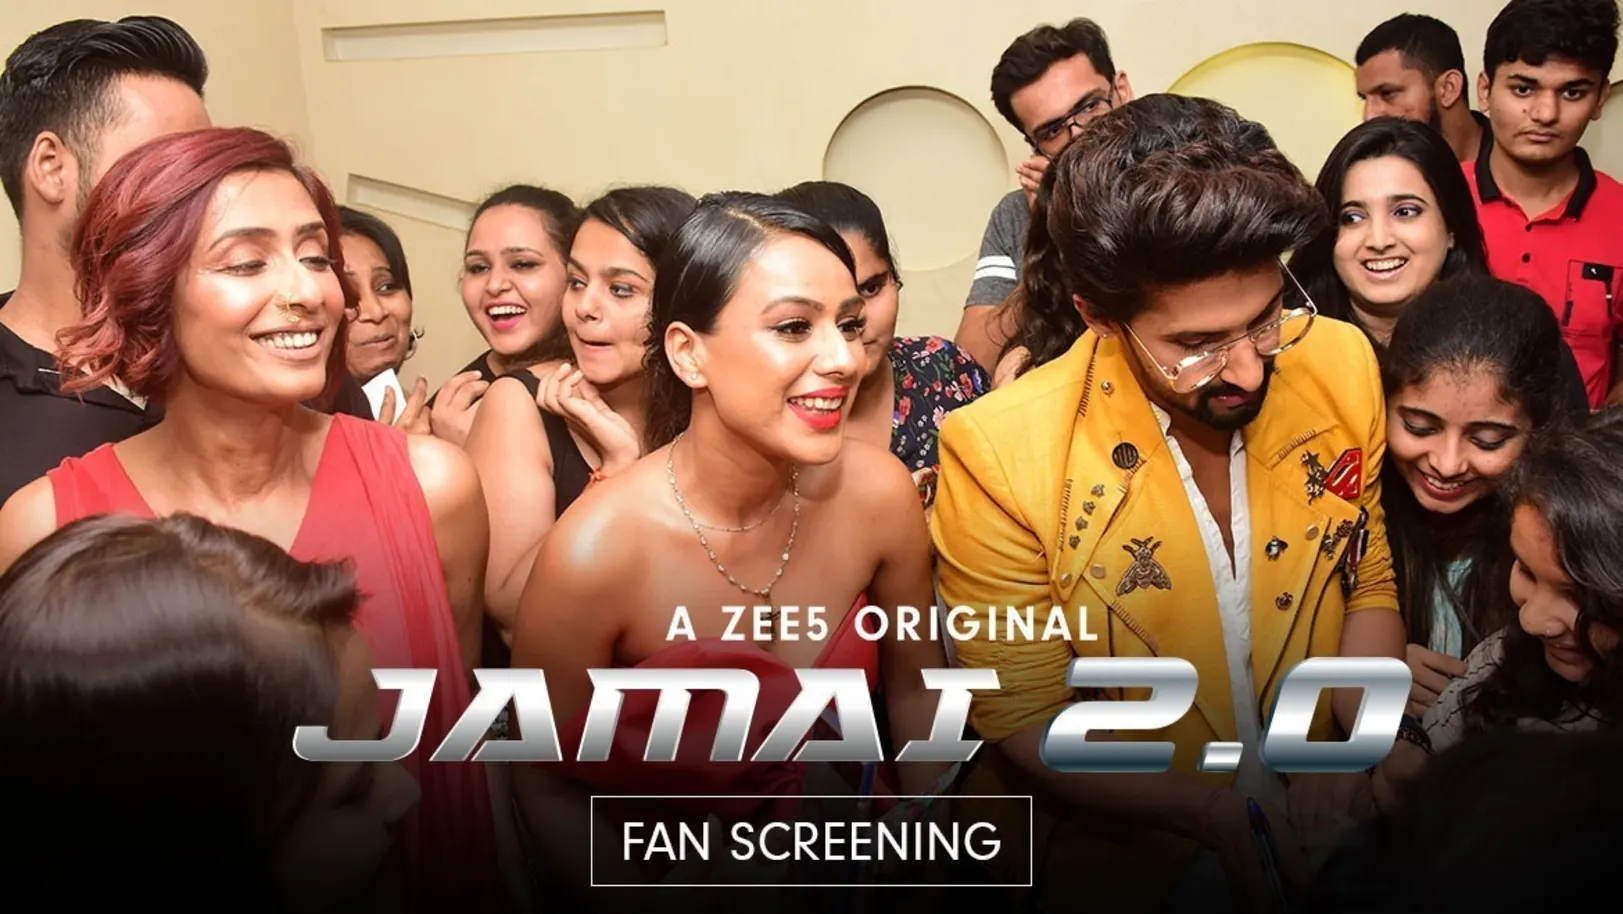 Special Screening for Fans - Jamai 2.0 